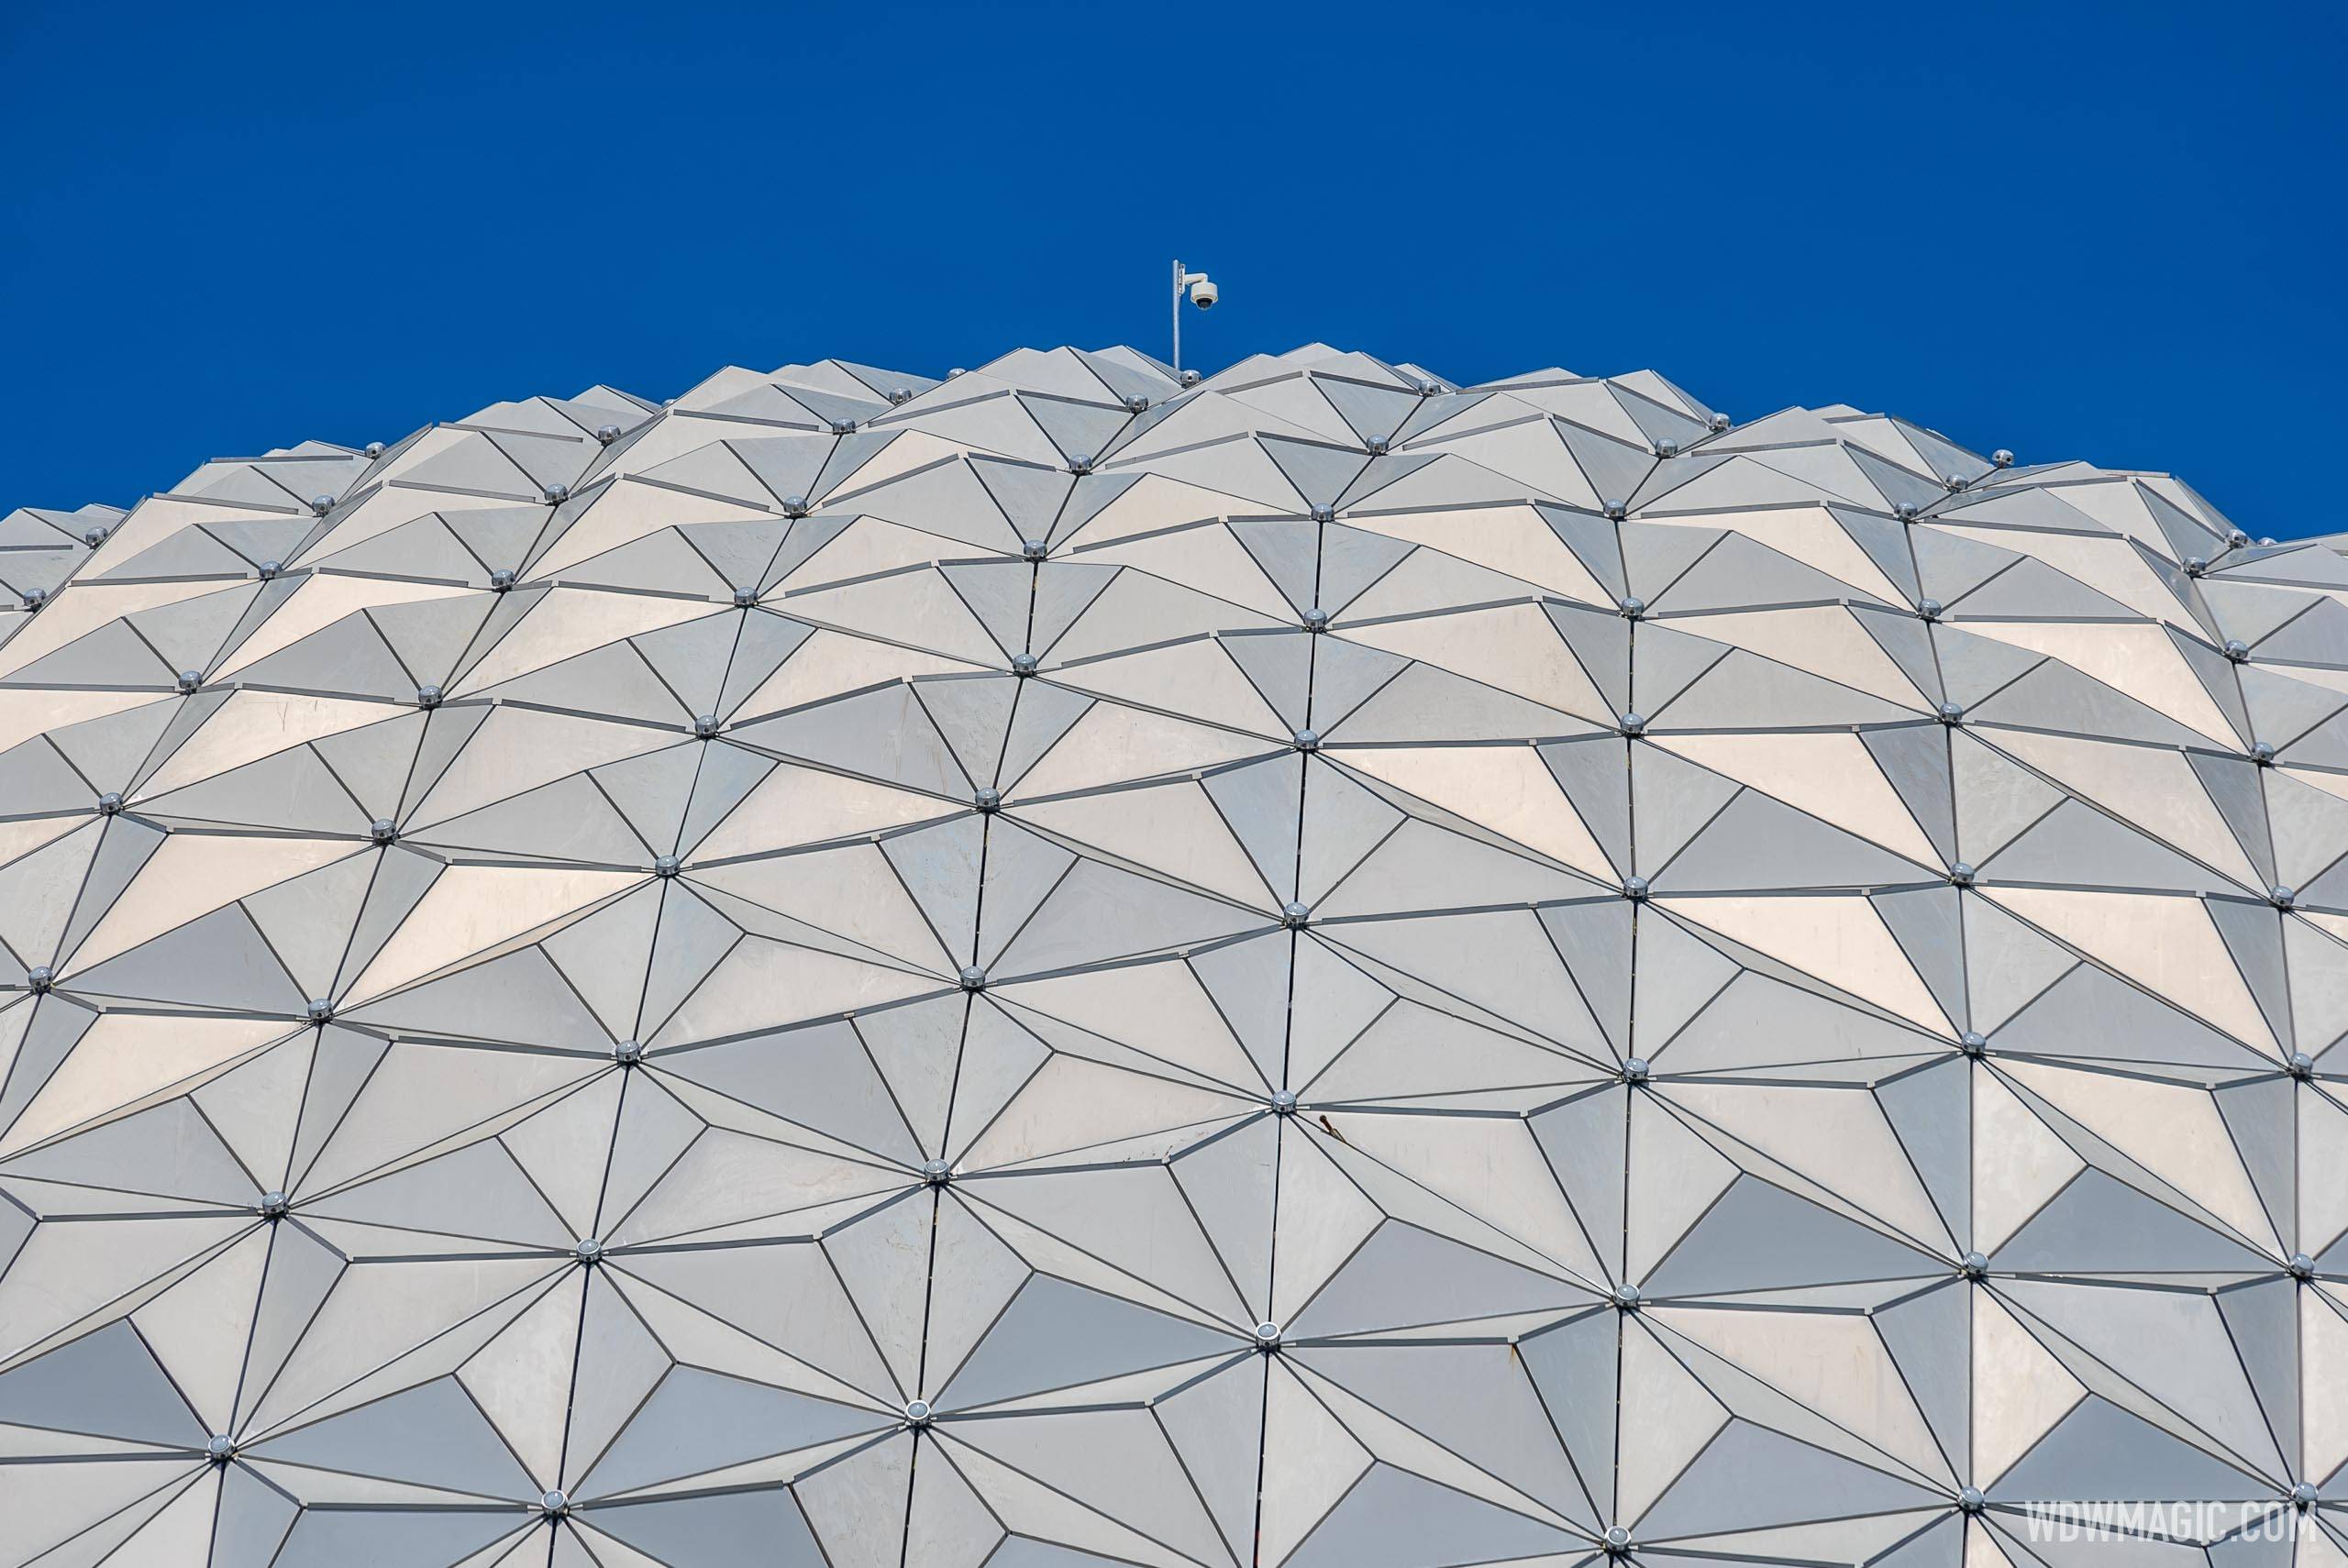 Camera on top of Spaceship Earth